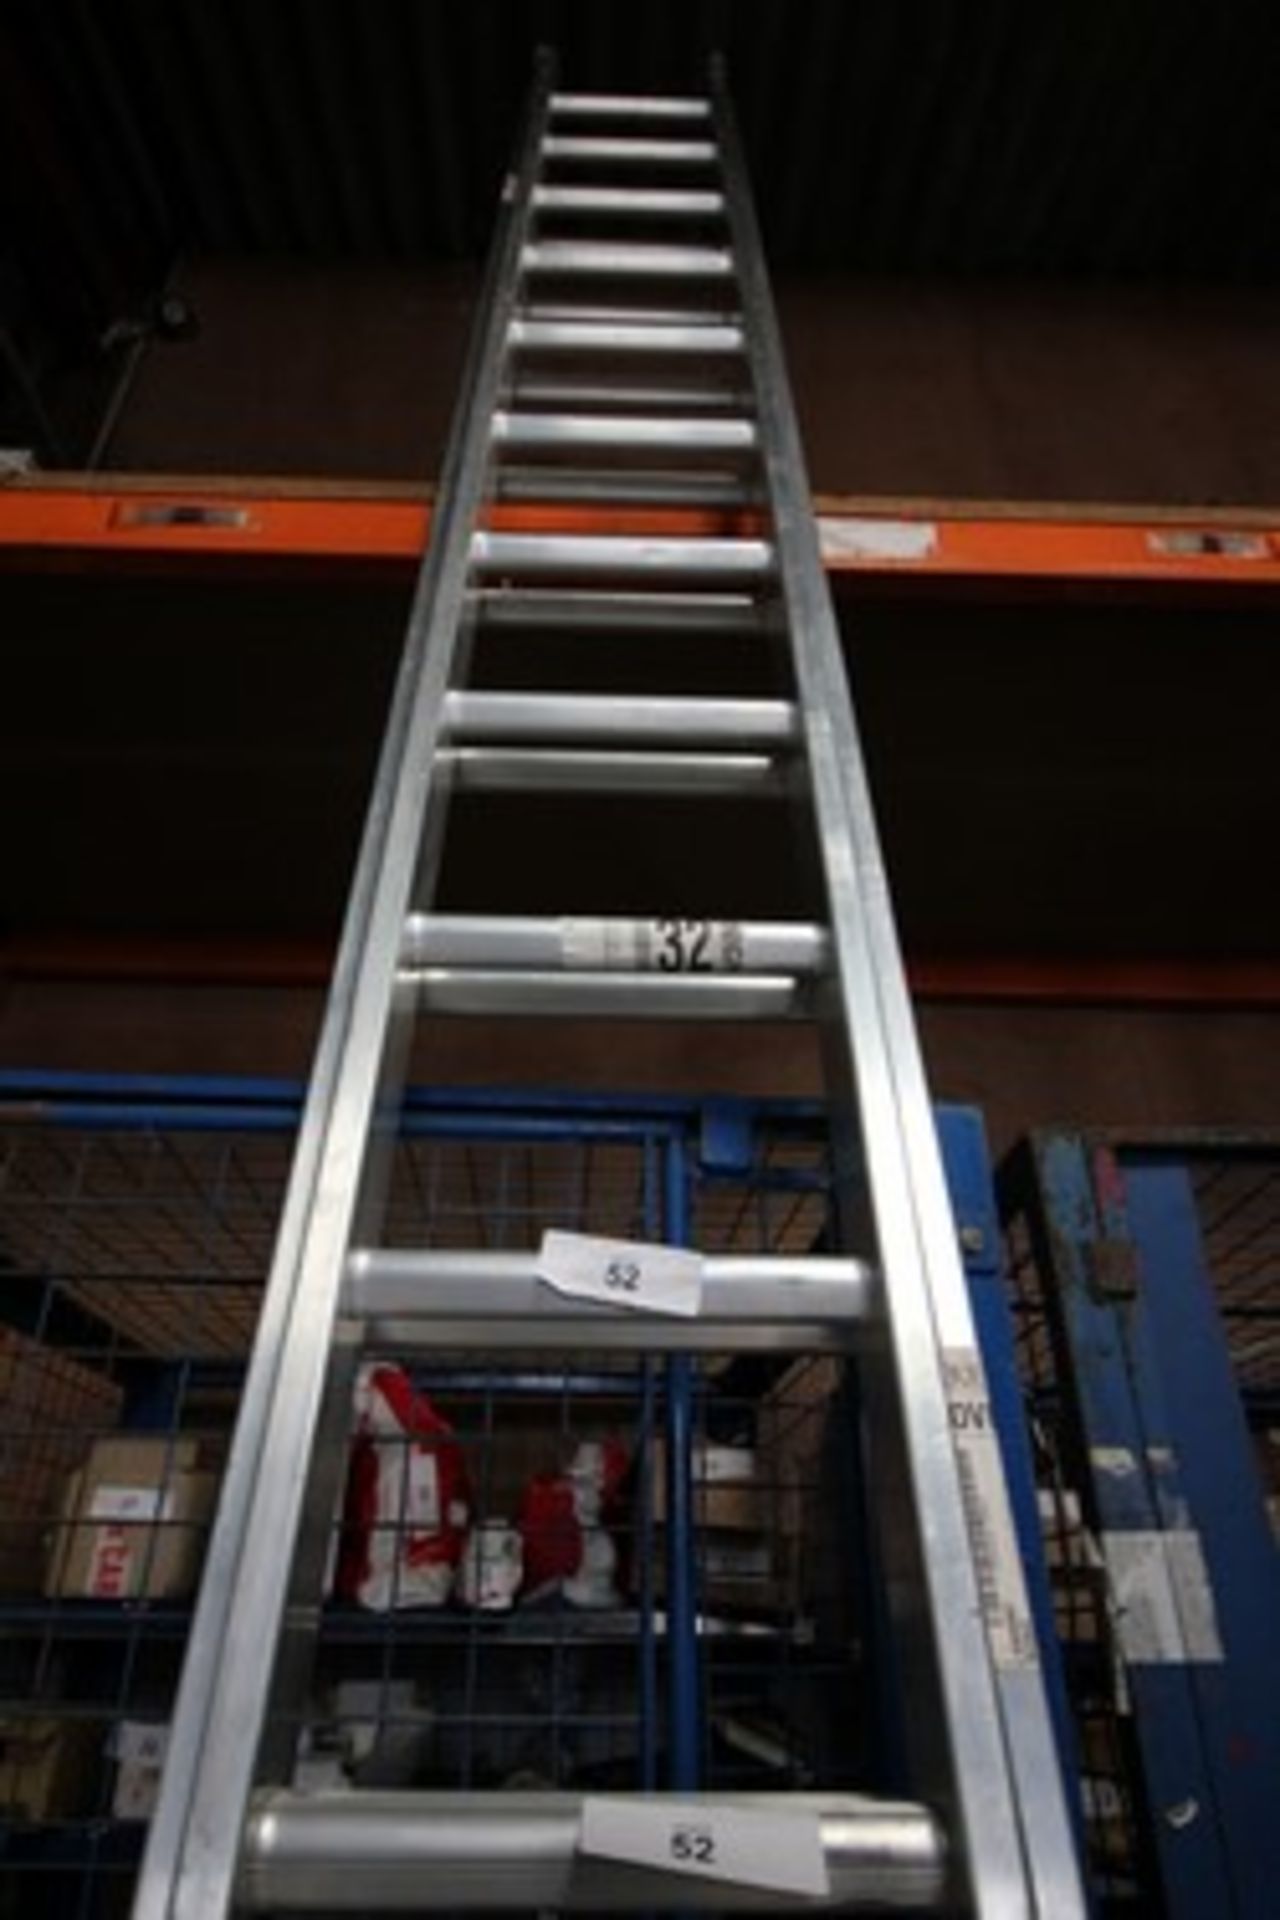 1 x 2 section 17 rung extending ladder - New (SWC2) - Image 2 of 2